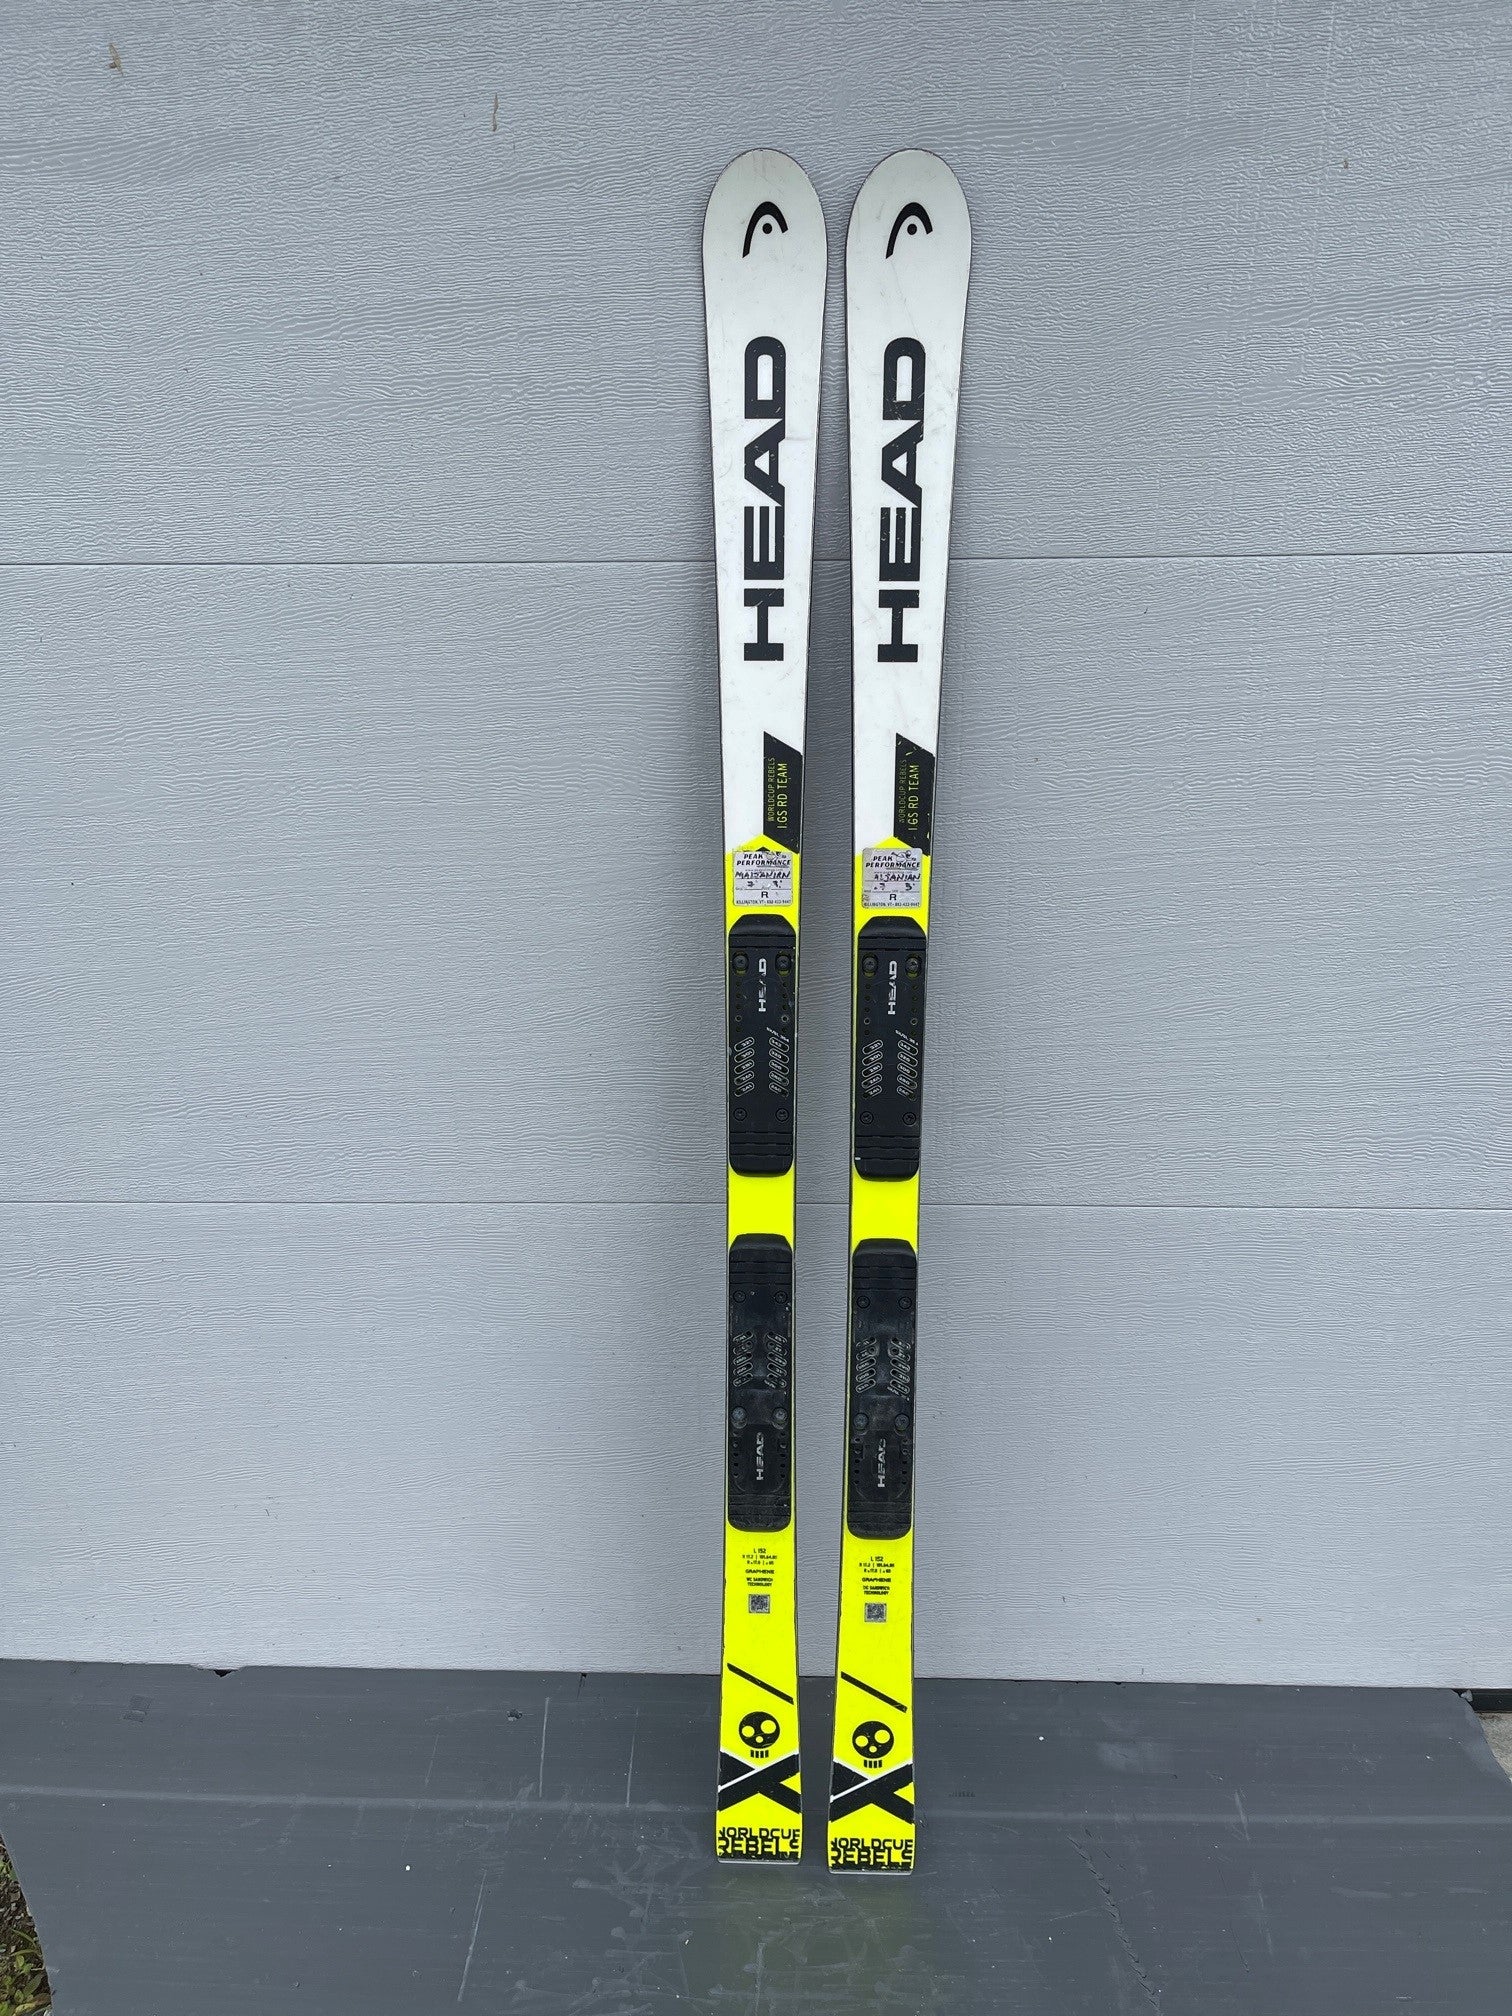 HEAD 152 cm World Cup Rebels i.GS RD Skis no bindings - used